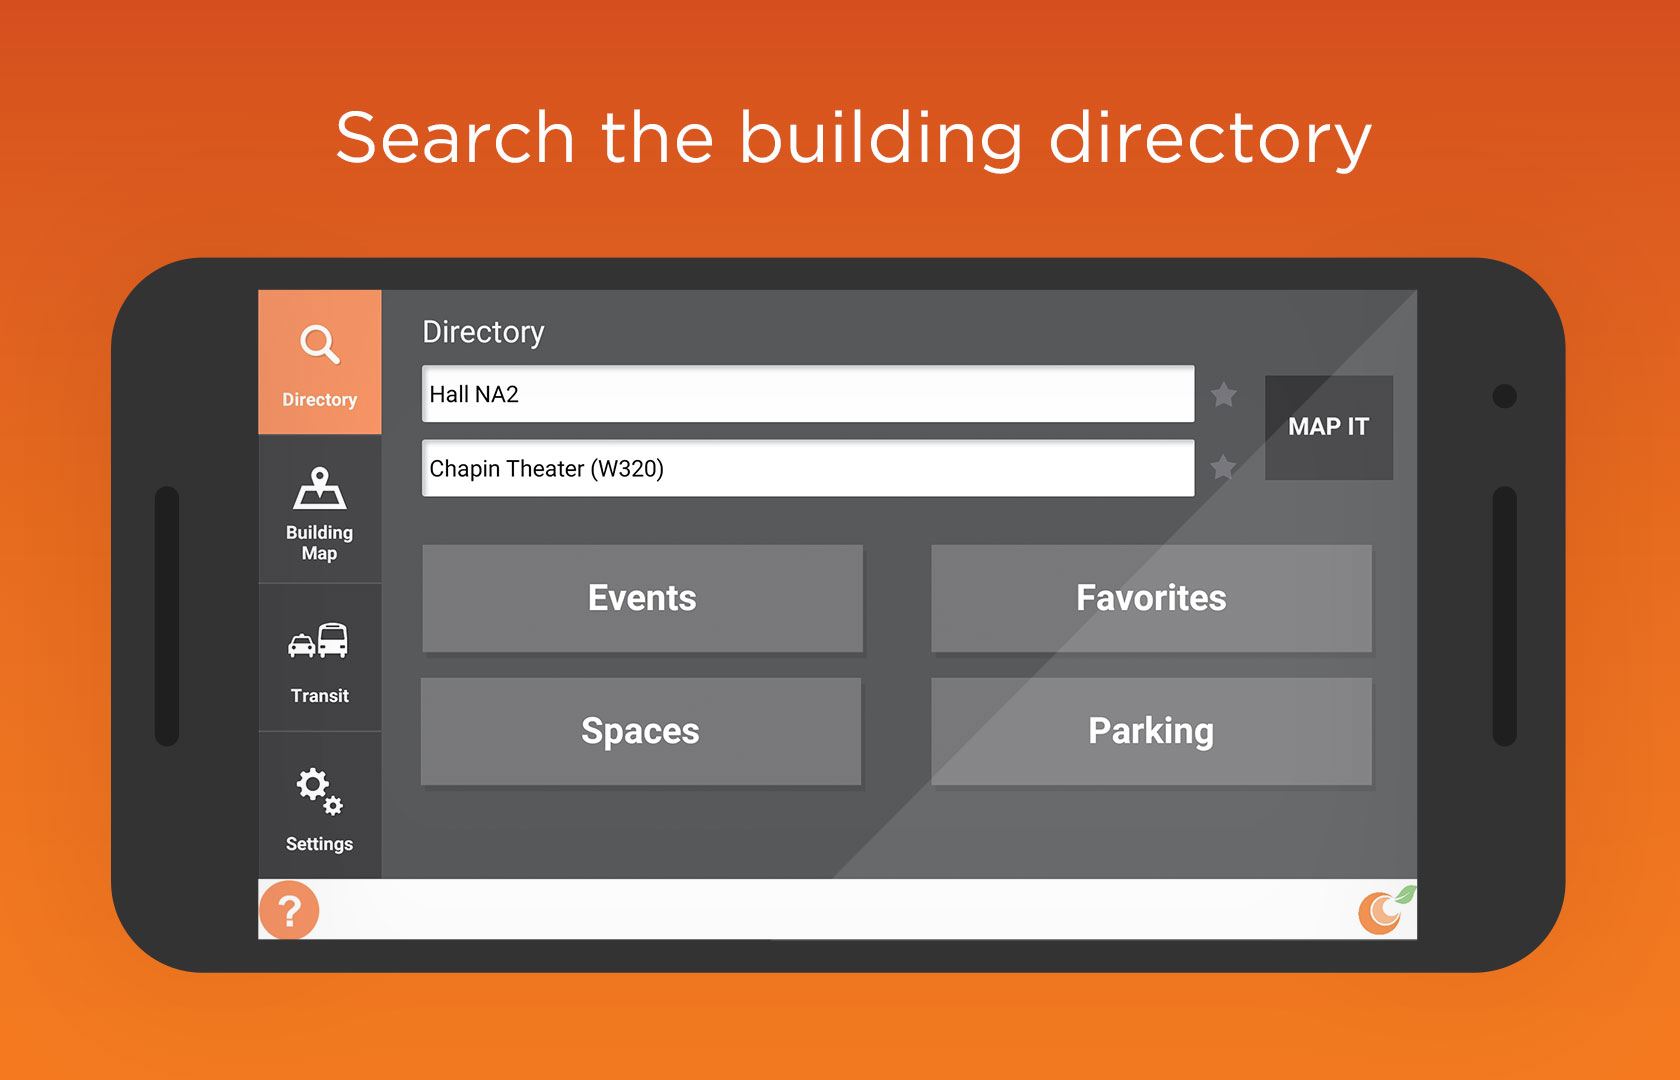 Search the building directory